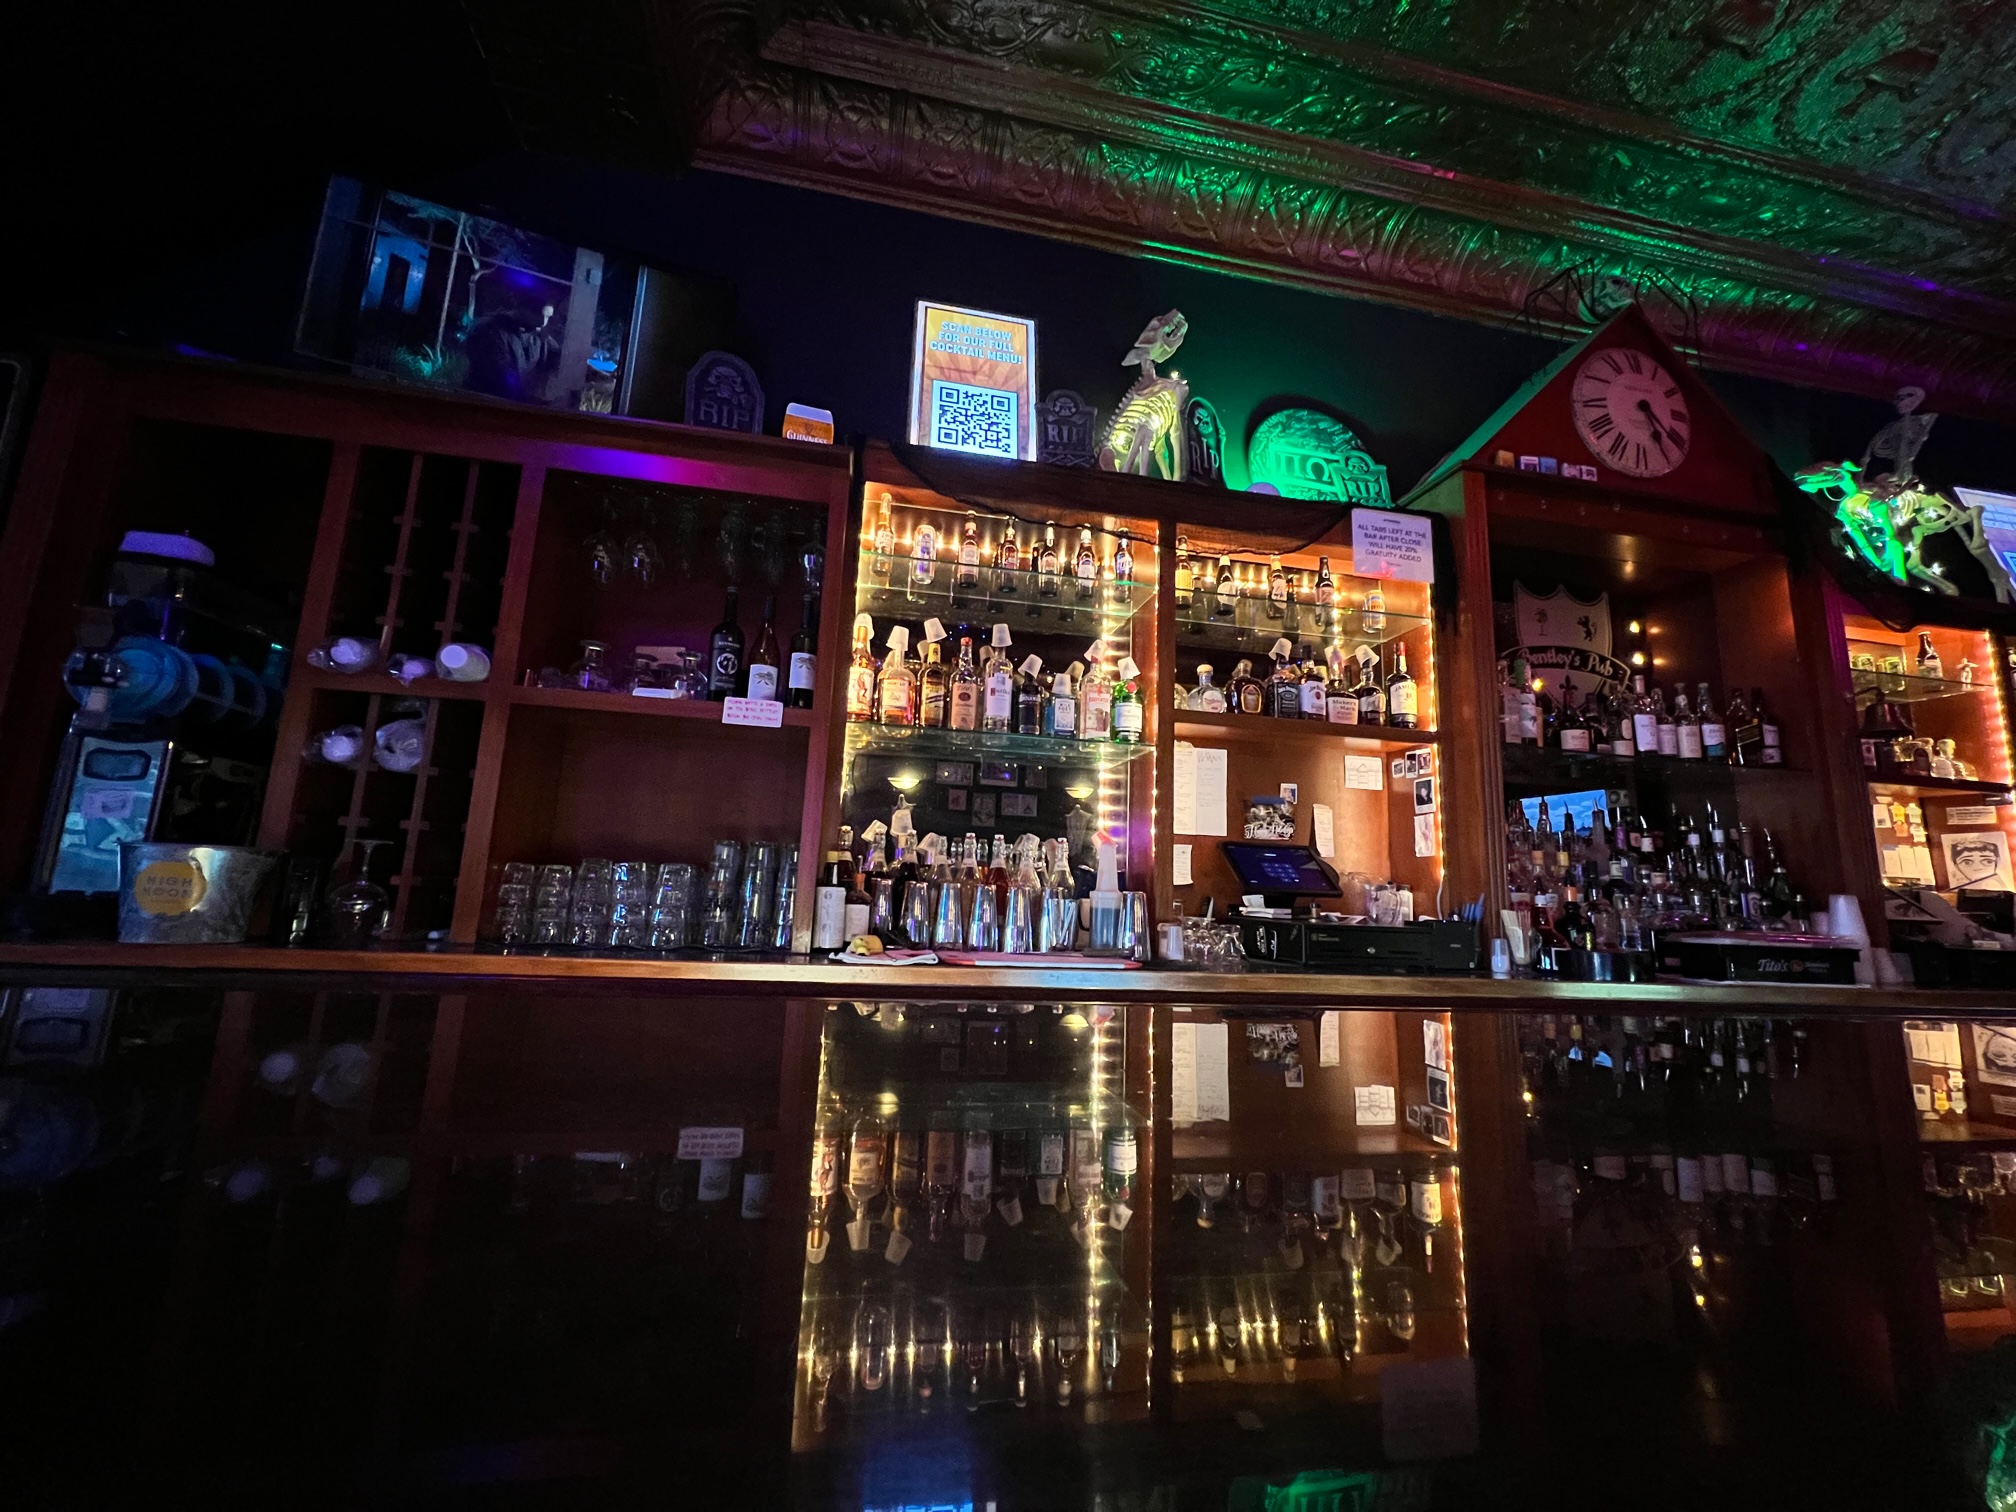 Inside Bentley's Pub, there is a dimly lit bar with Halloween touches. Photo by Alyssa Buckley.